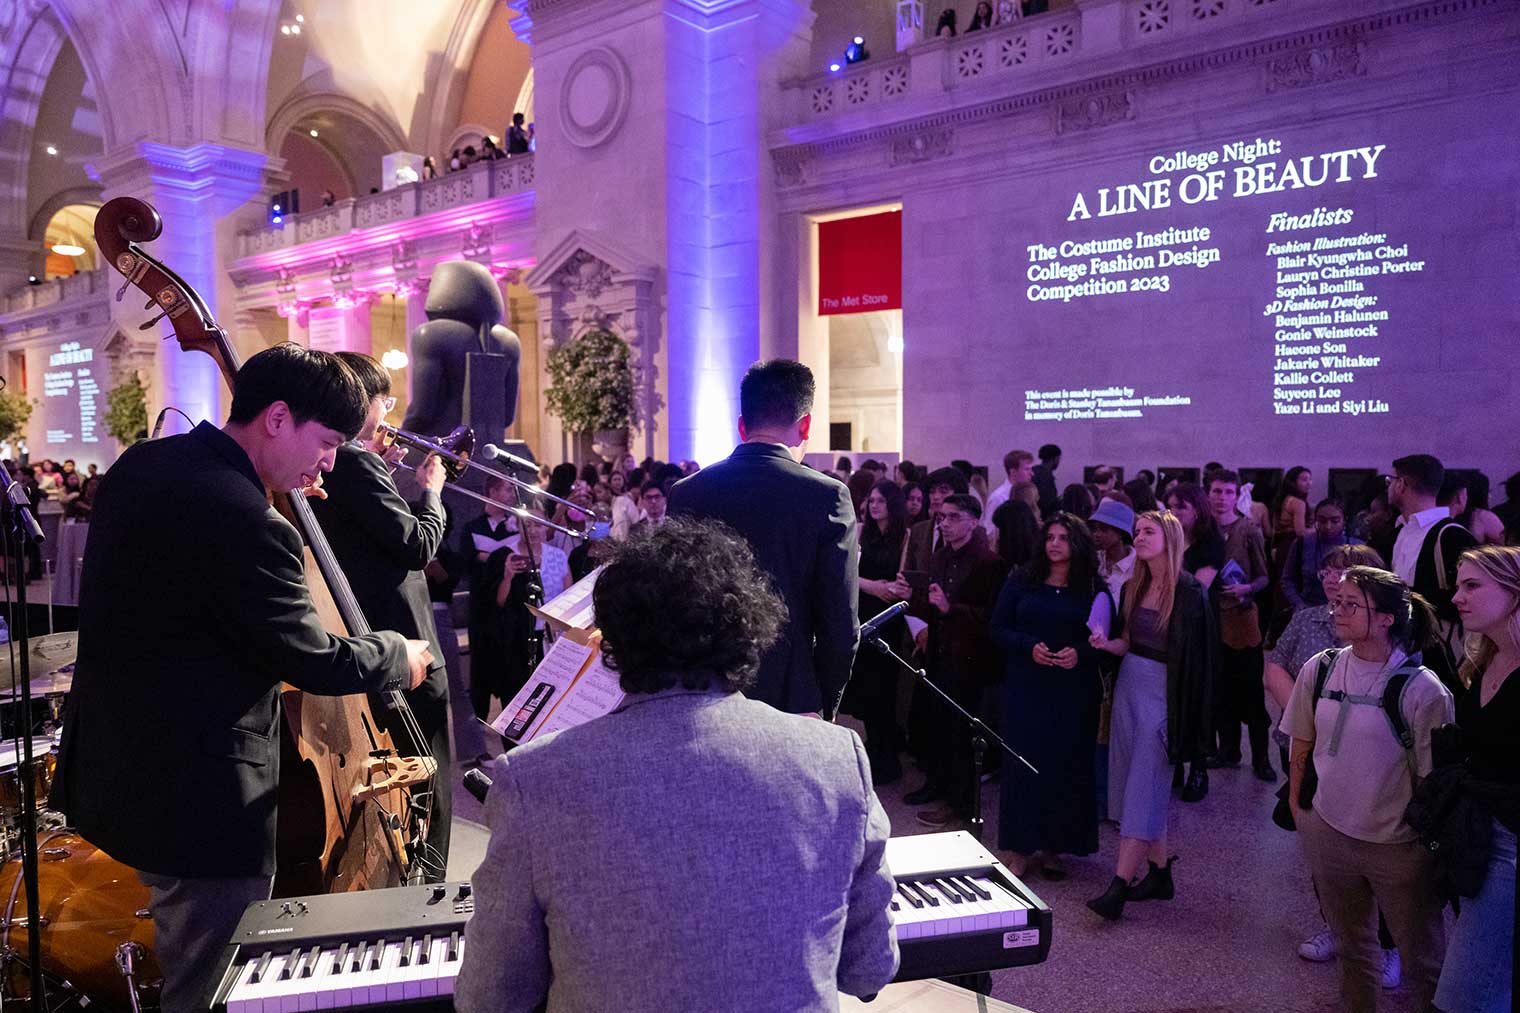 A keyboard player wearing a gray blazer and a double bass player perform music to a crowd of young people in a museum gallery.